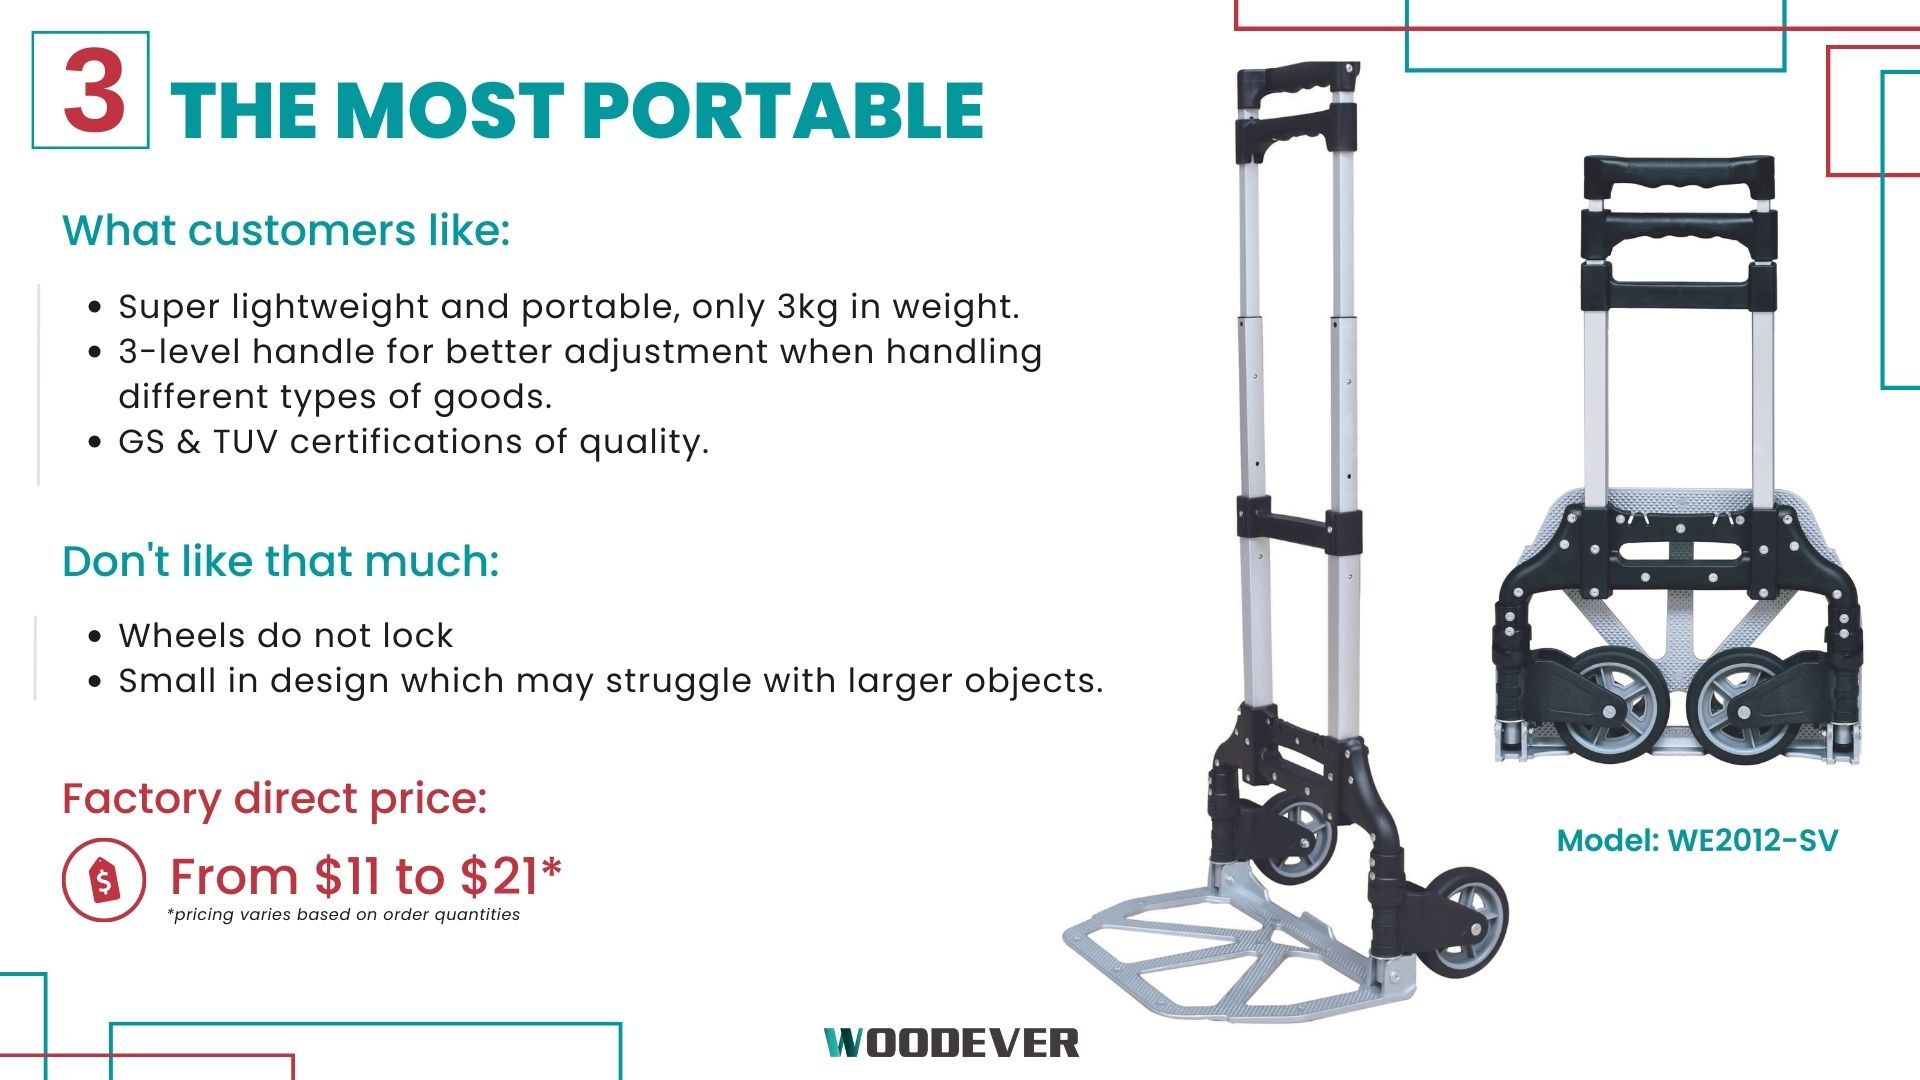 The most compact and portable hand dolly made of aluminum with loading capacity of 75 kg